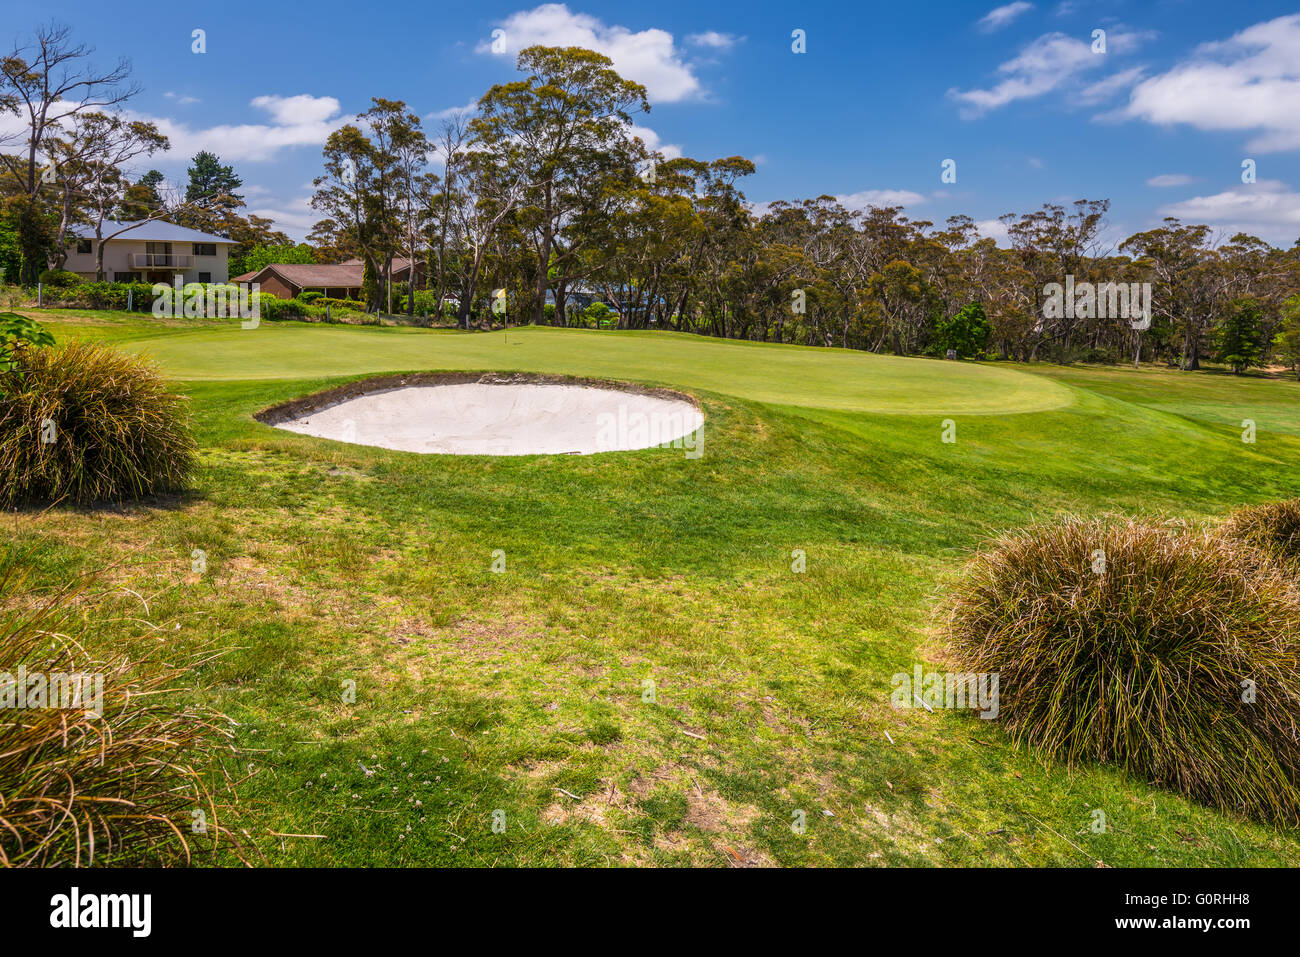 View of Golf course with a bunker and a good green in a nice day, Katoomba, New South Wales, Australia Stock Photo